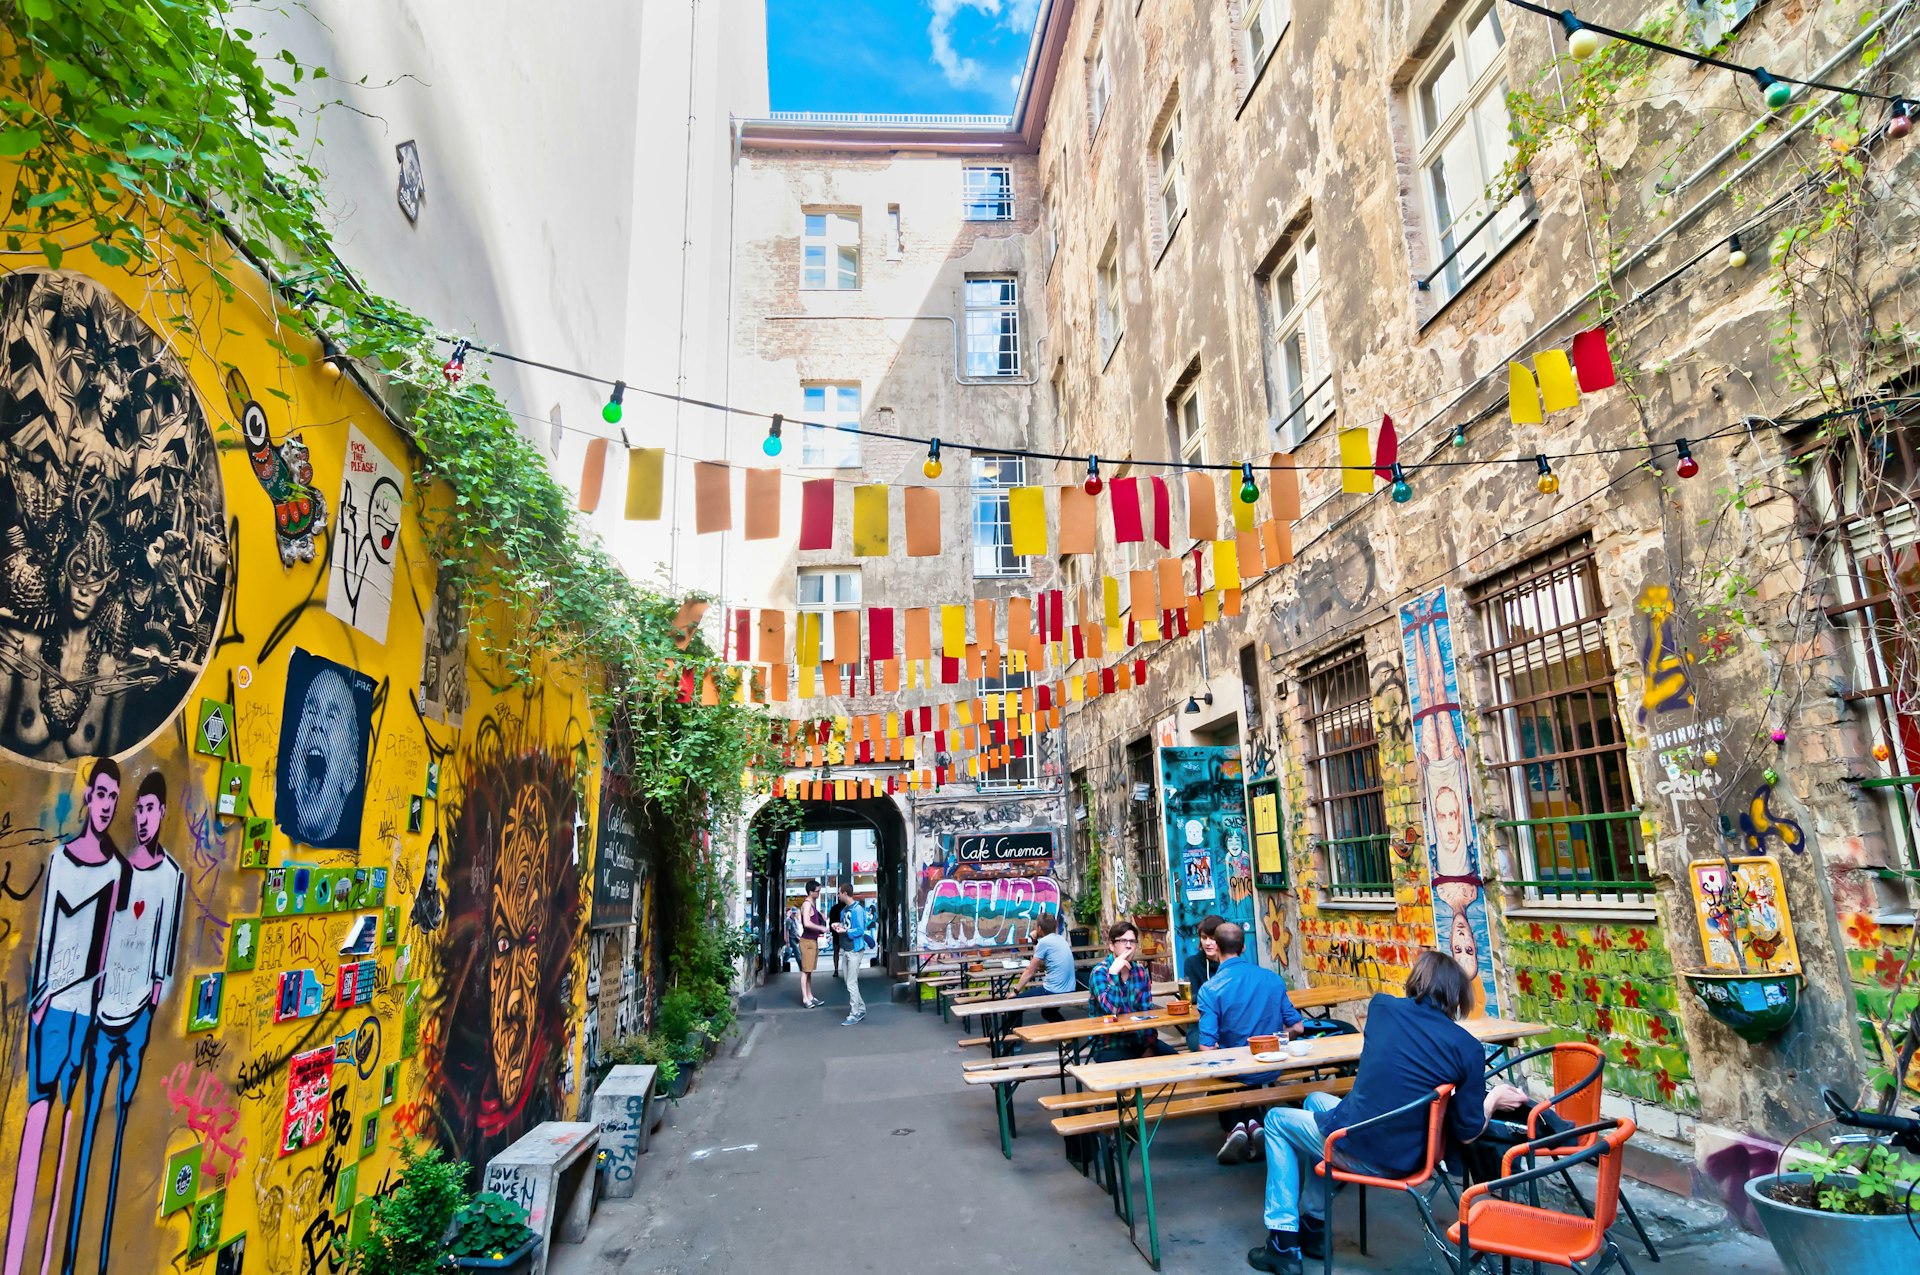 People seated at a small laneway with graffiti and colorful street art lining the walls